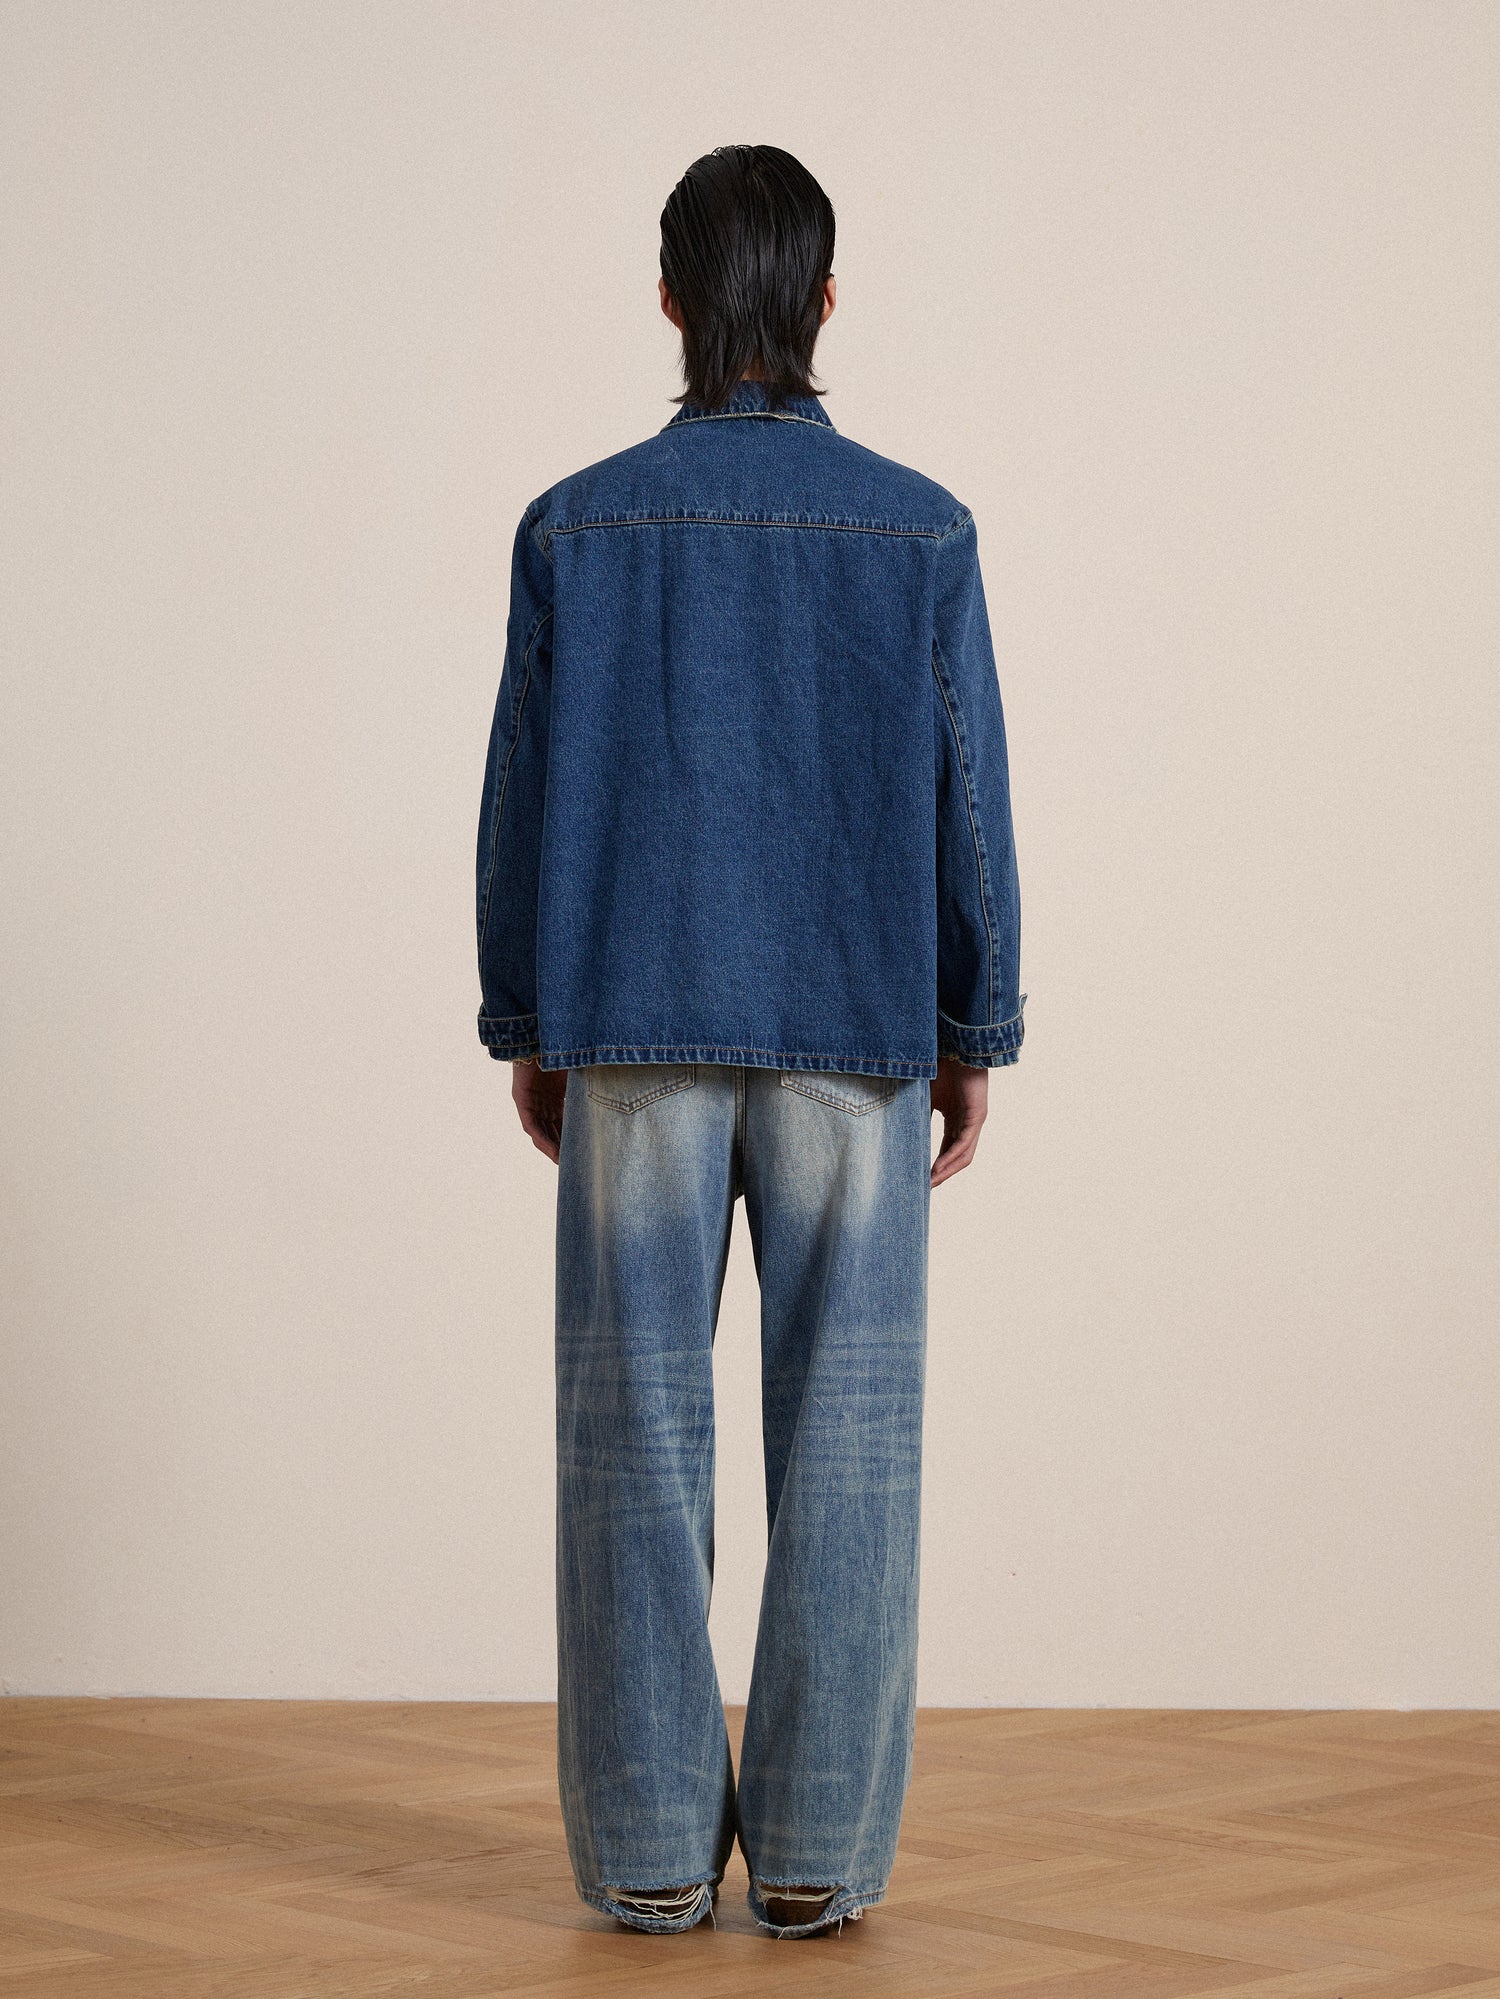 Rear view of a person wearing a Found Azin denim pullover work shirt and wide-legged jeans, standing in a room with a beige wall and wooden floor.